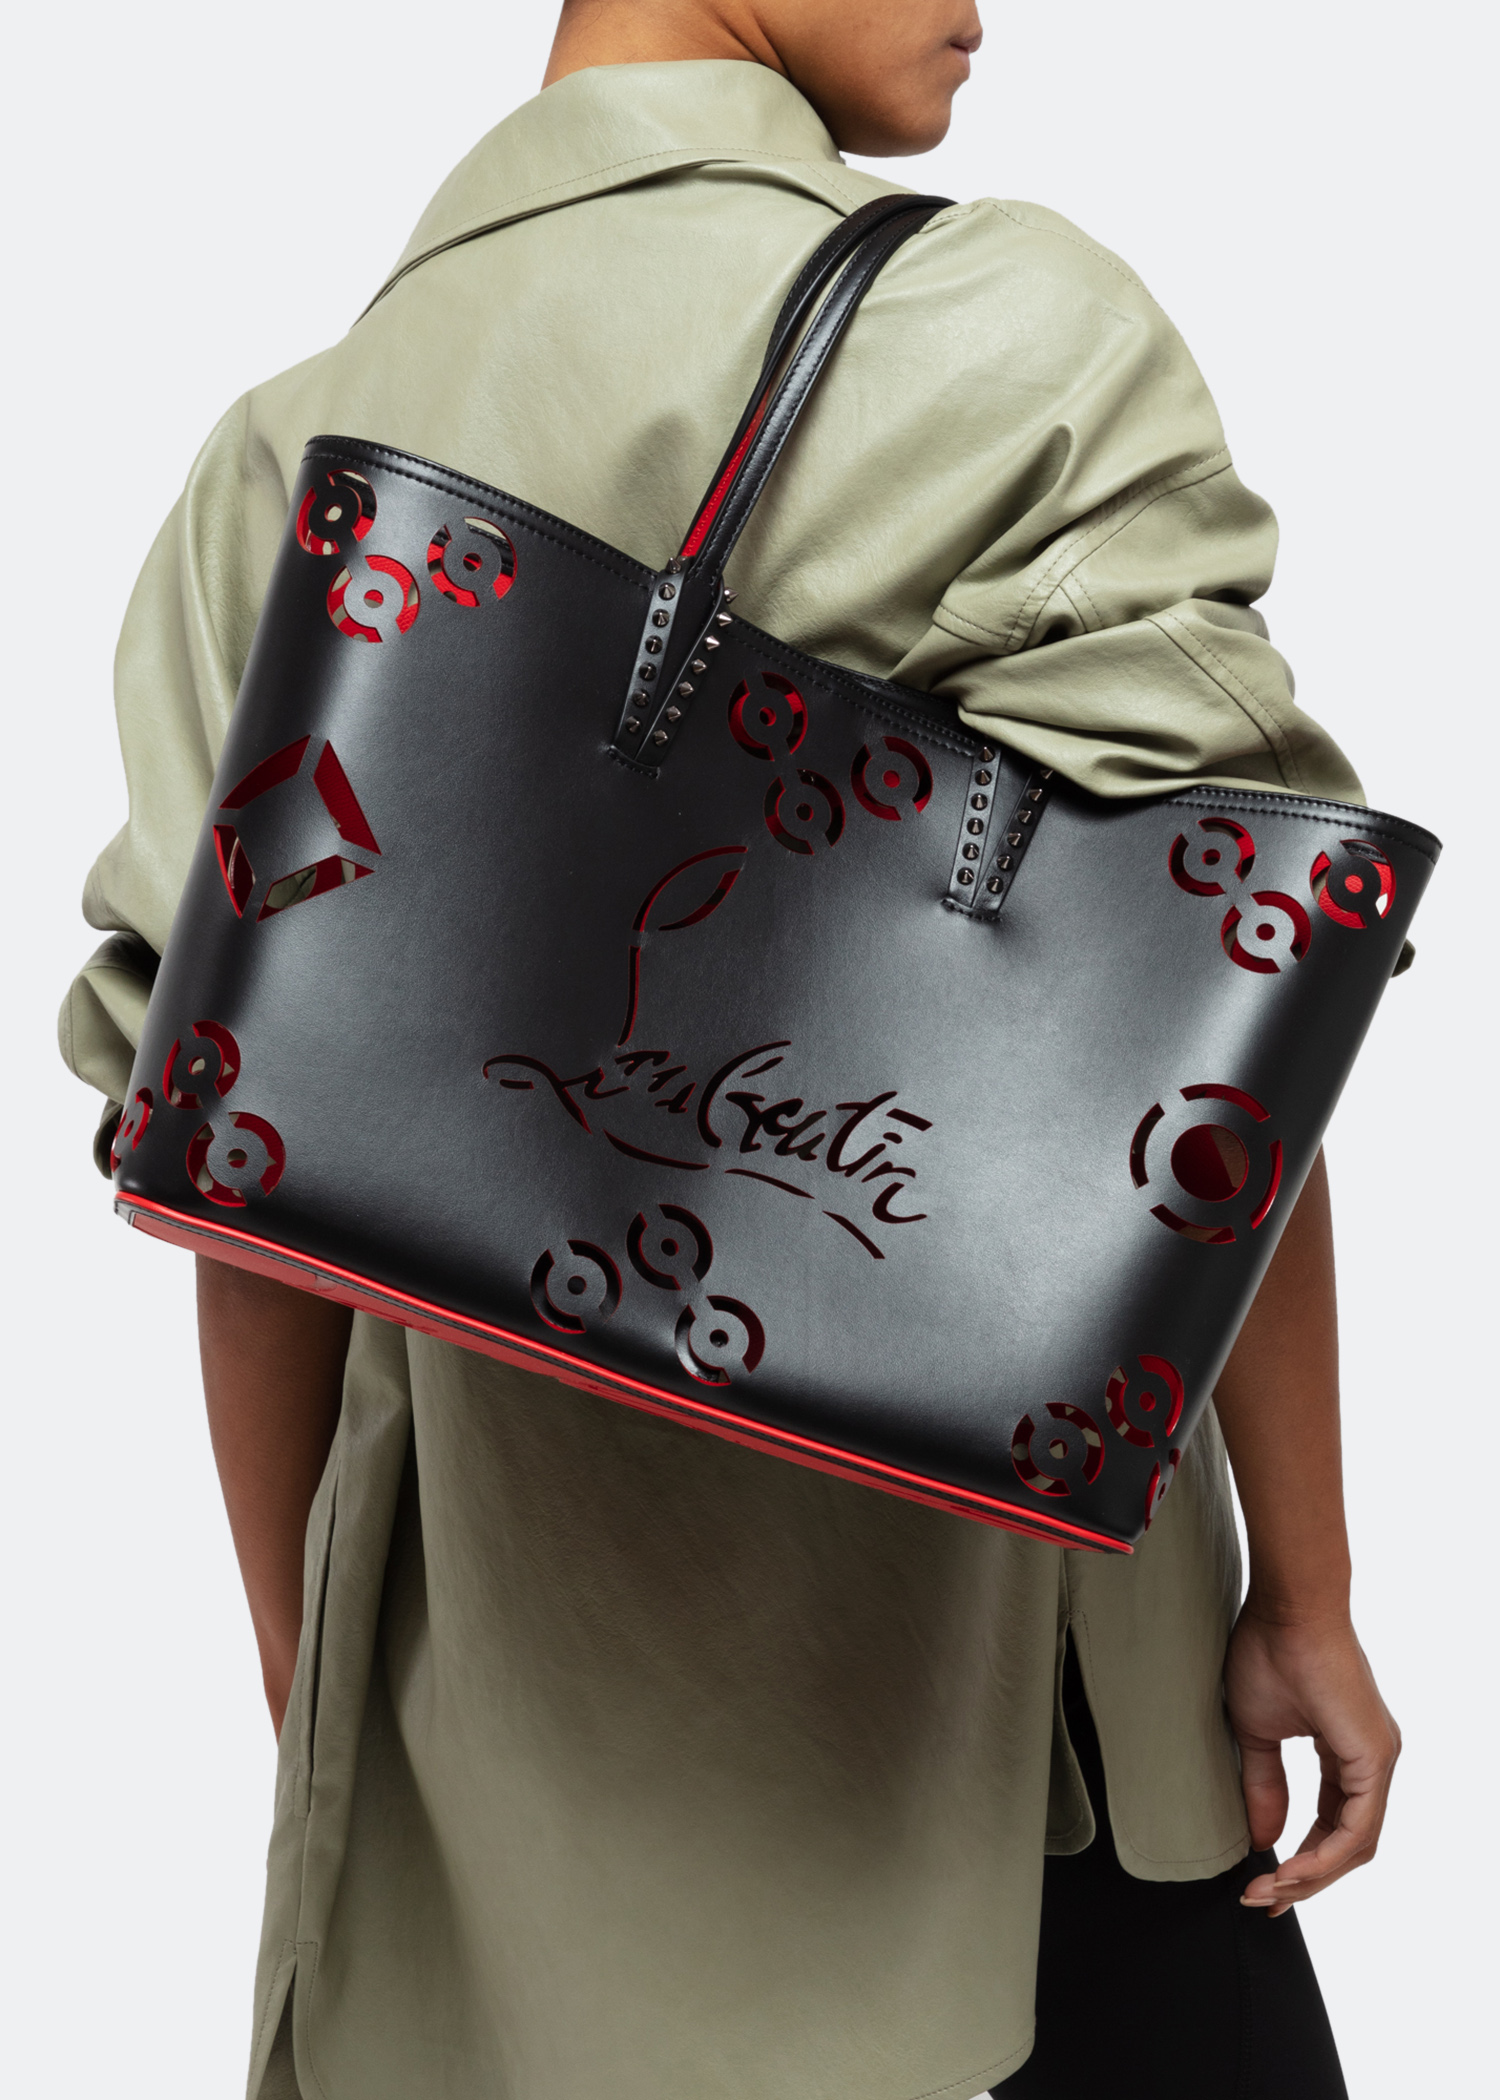 All day long easy carry bag. Christian Louboutin Cabata Tote Bag